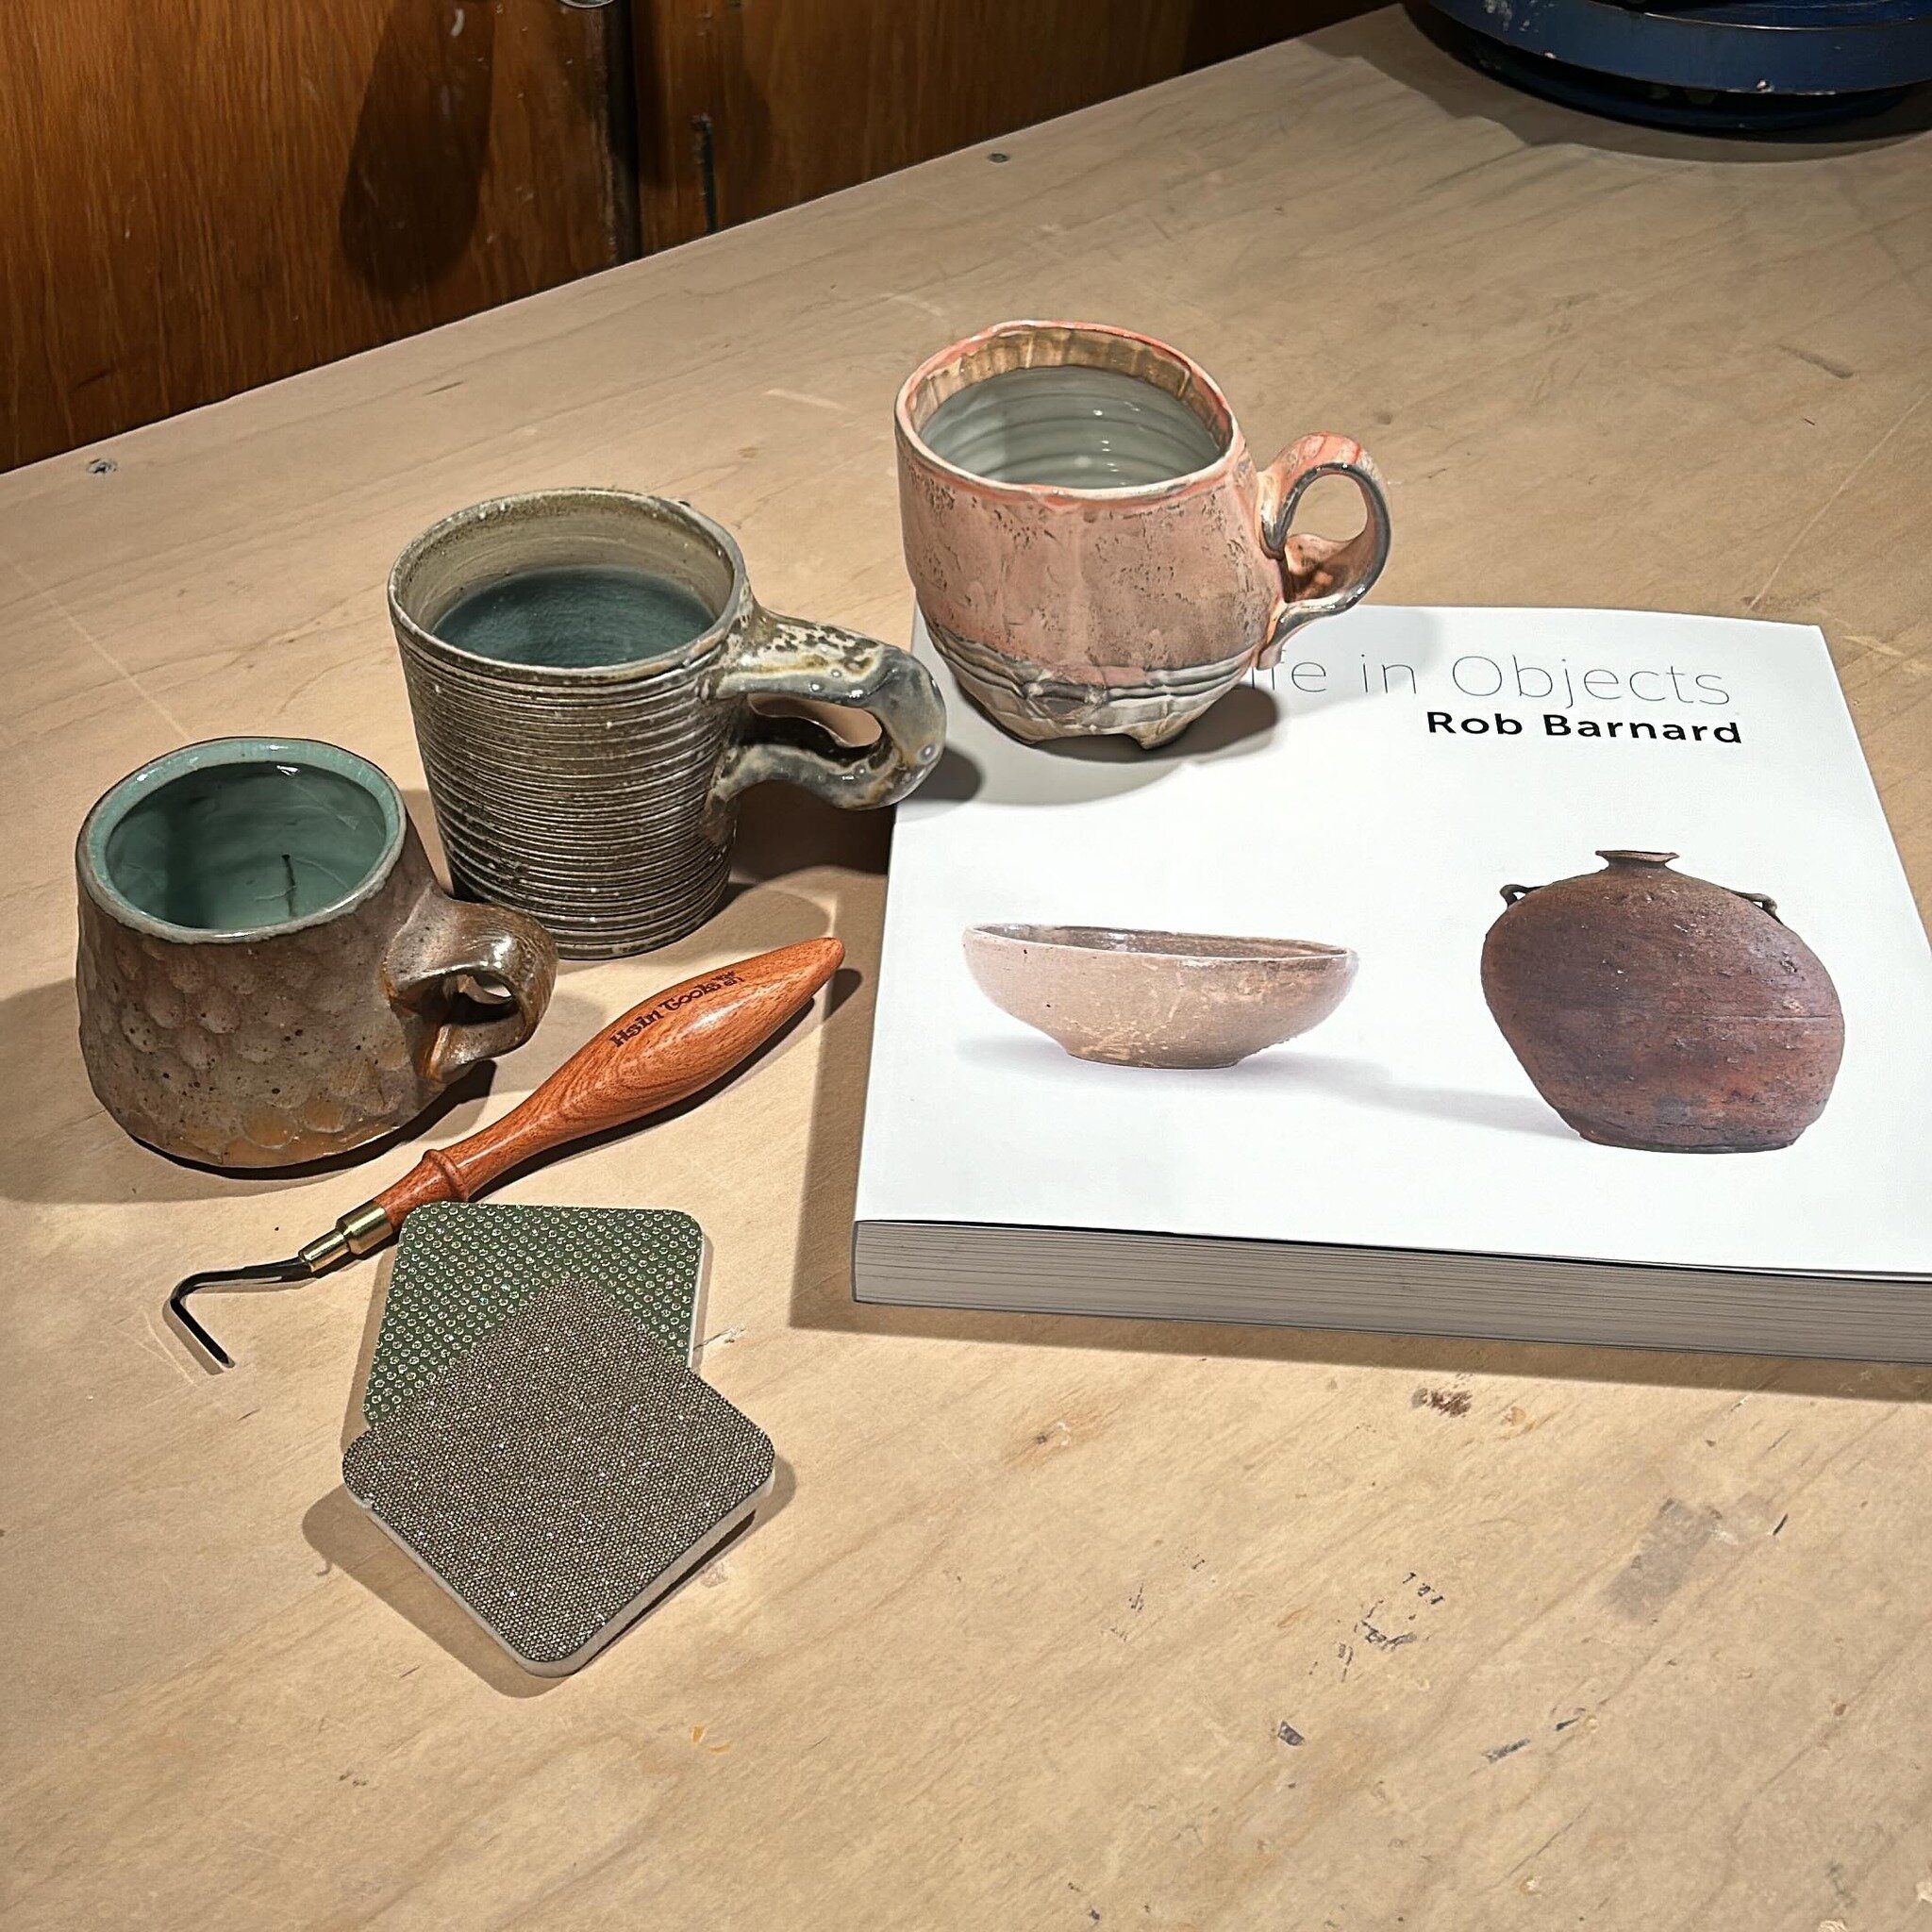 My @nceca.rva haul for 2024! I got &ldquo;A Life in Objects&rdquo; by @rob__barnard__pottery. 
A new trimming tool from @hsinchuenlin that I&rsquo;m looking forward to using this week! 
A couple of flexible, diamond sanding pads from @diamondcoretool